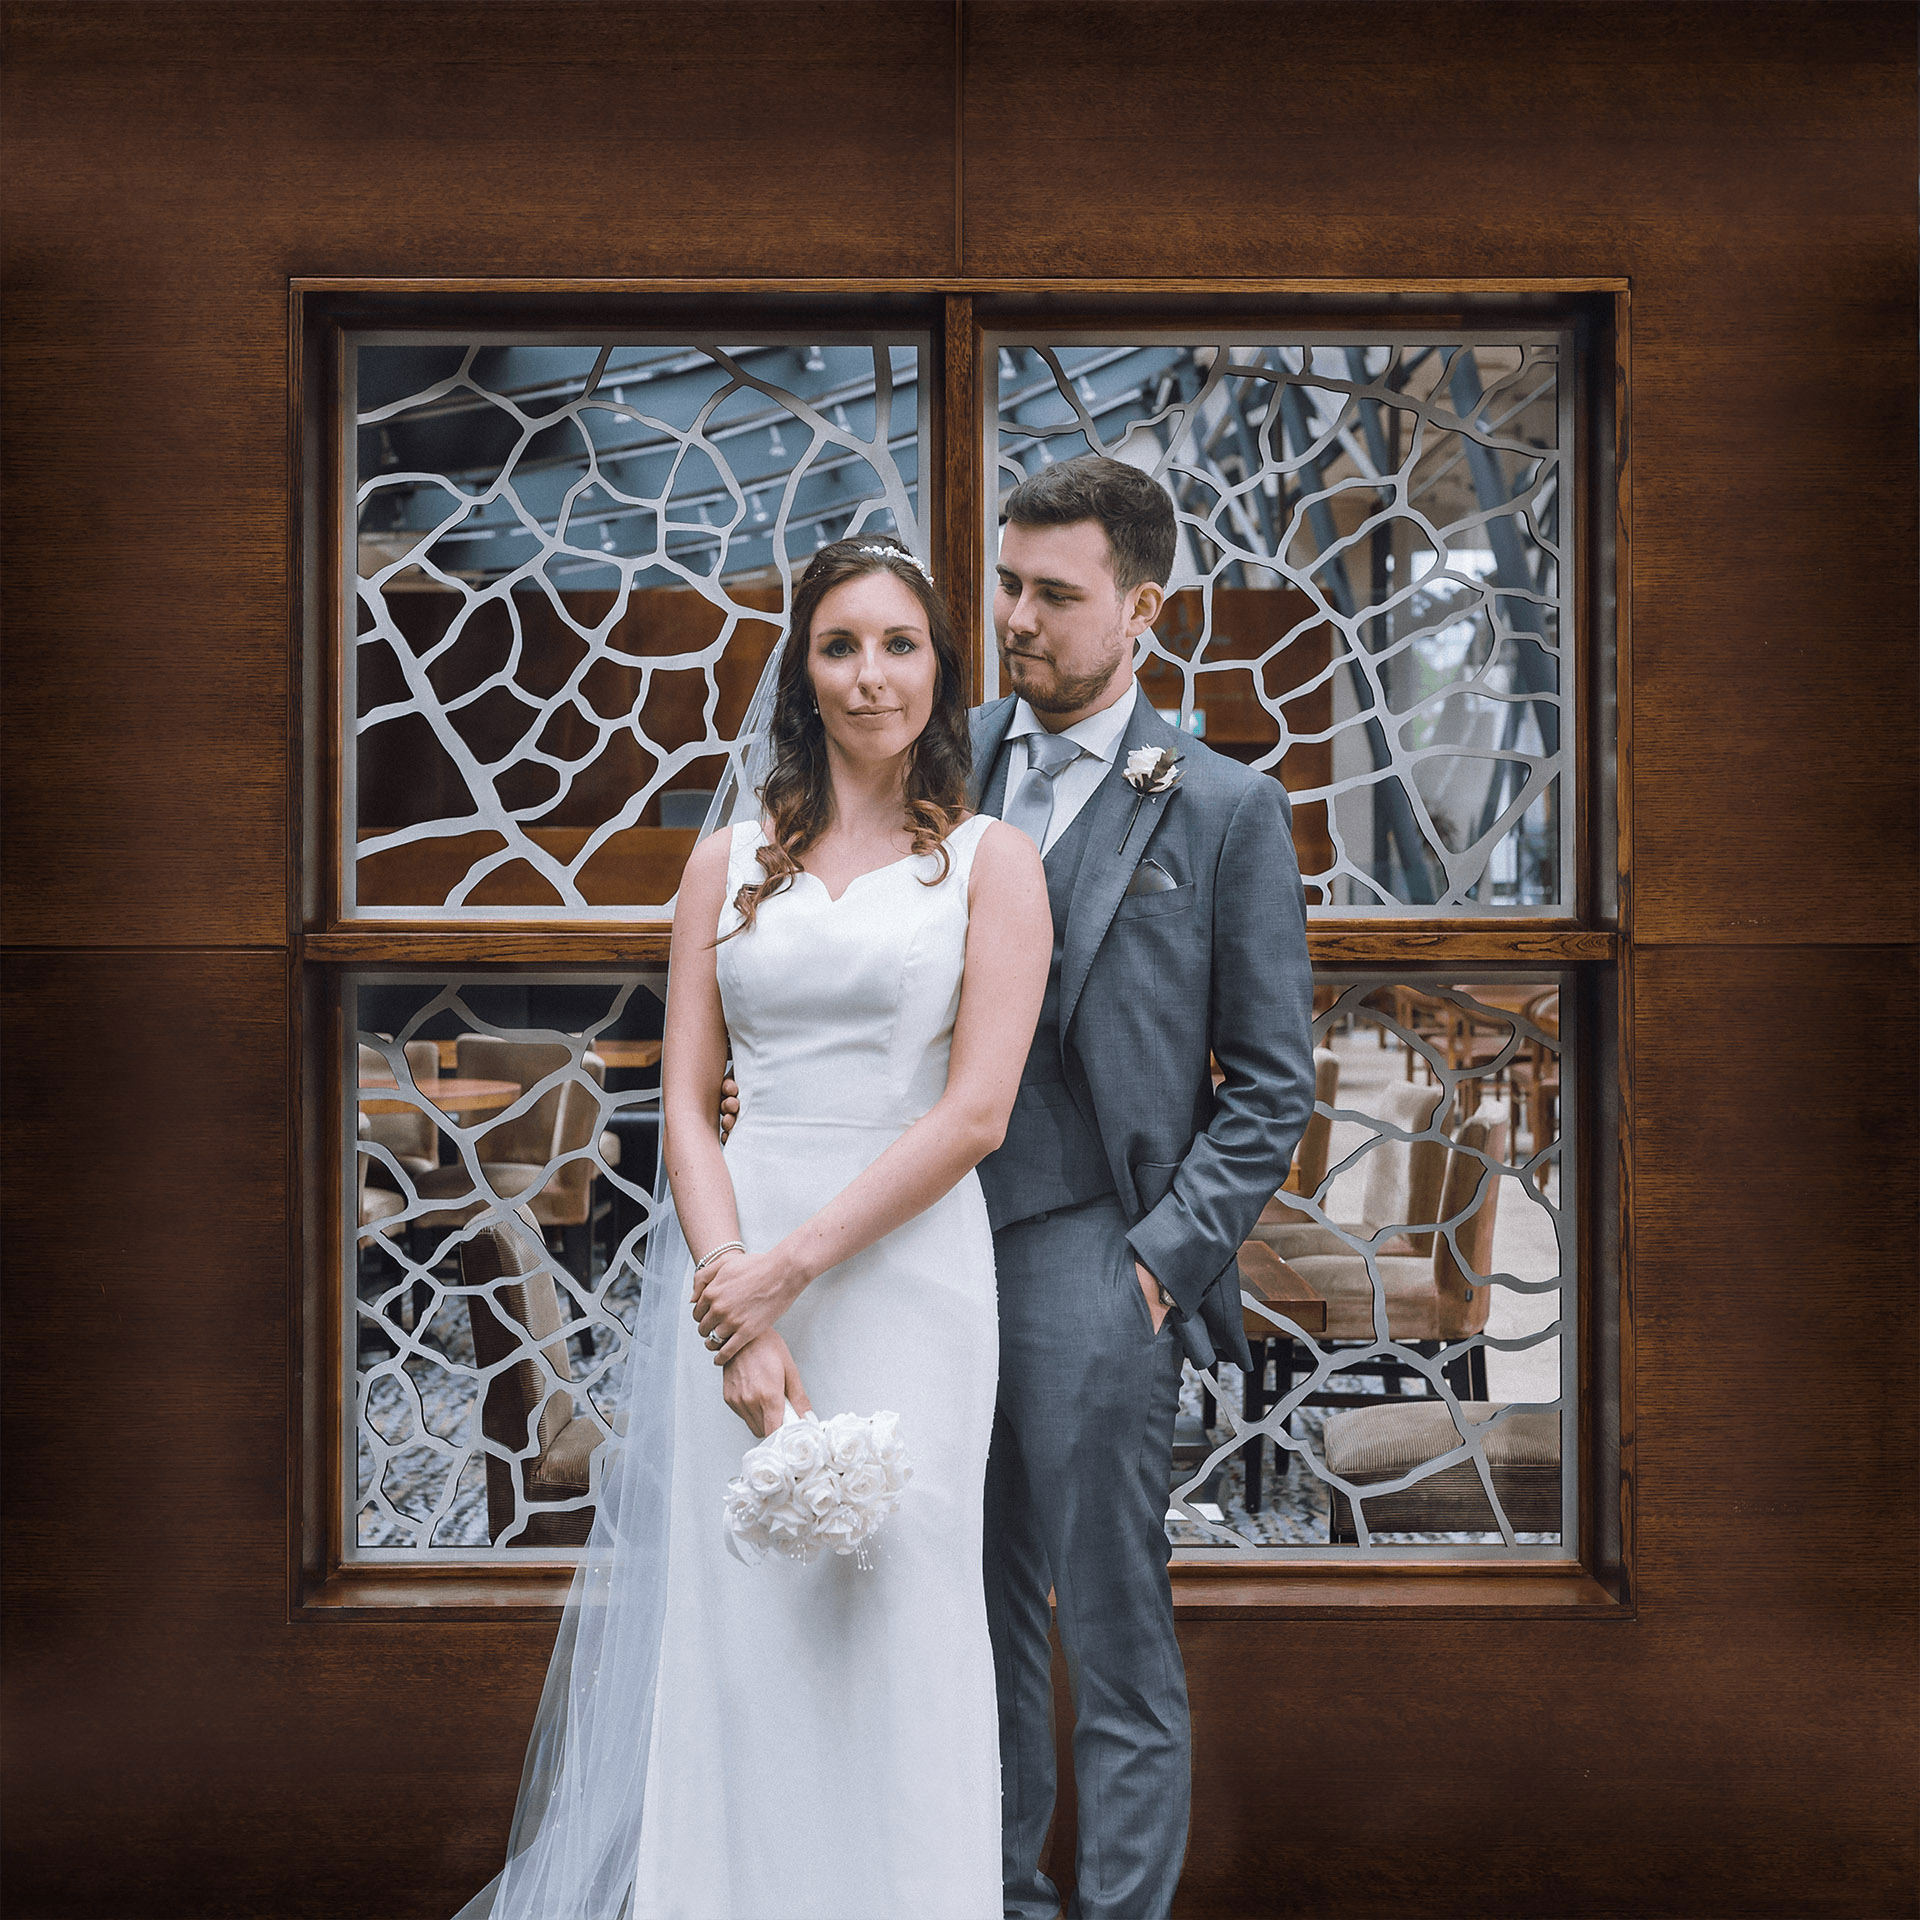 The bride and groom stand together in front of a square wooden panel